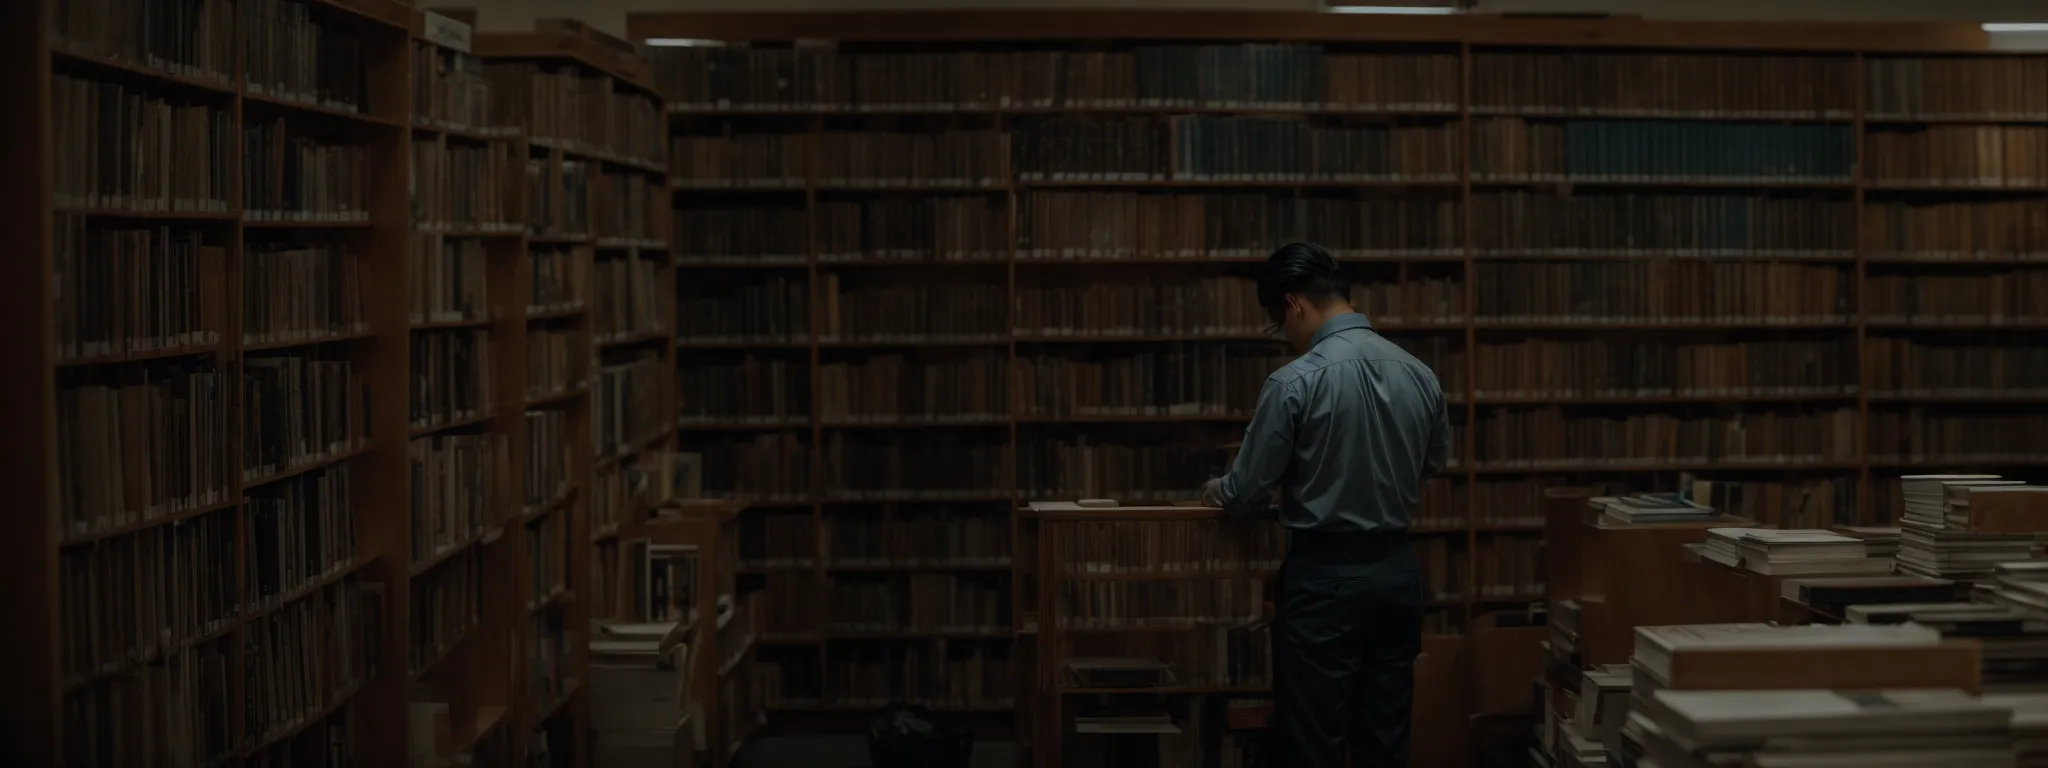 a solitary librarian organizing a shelf to ensure every book has its unique place.